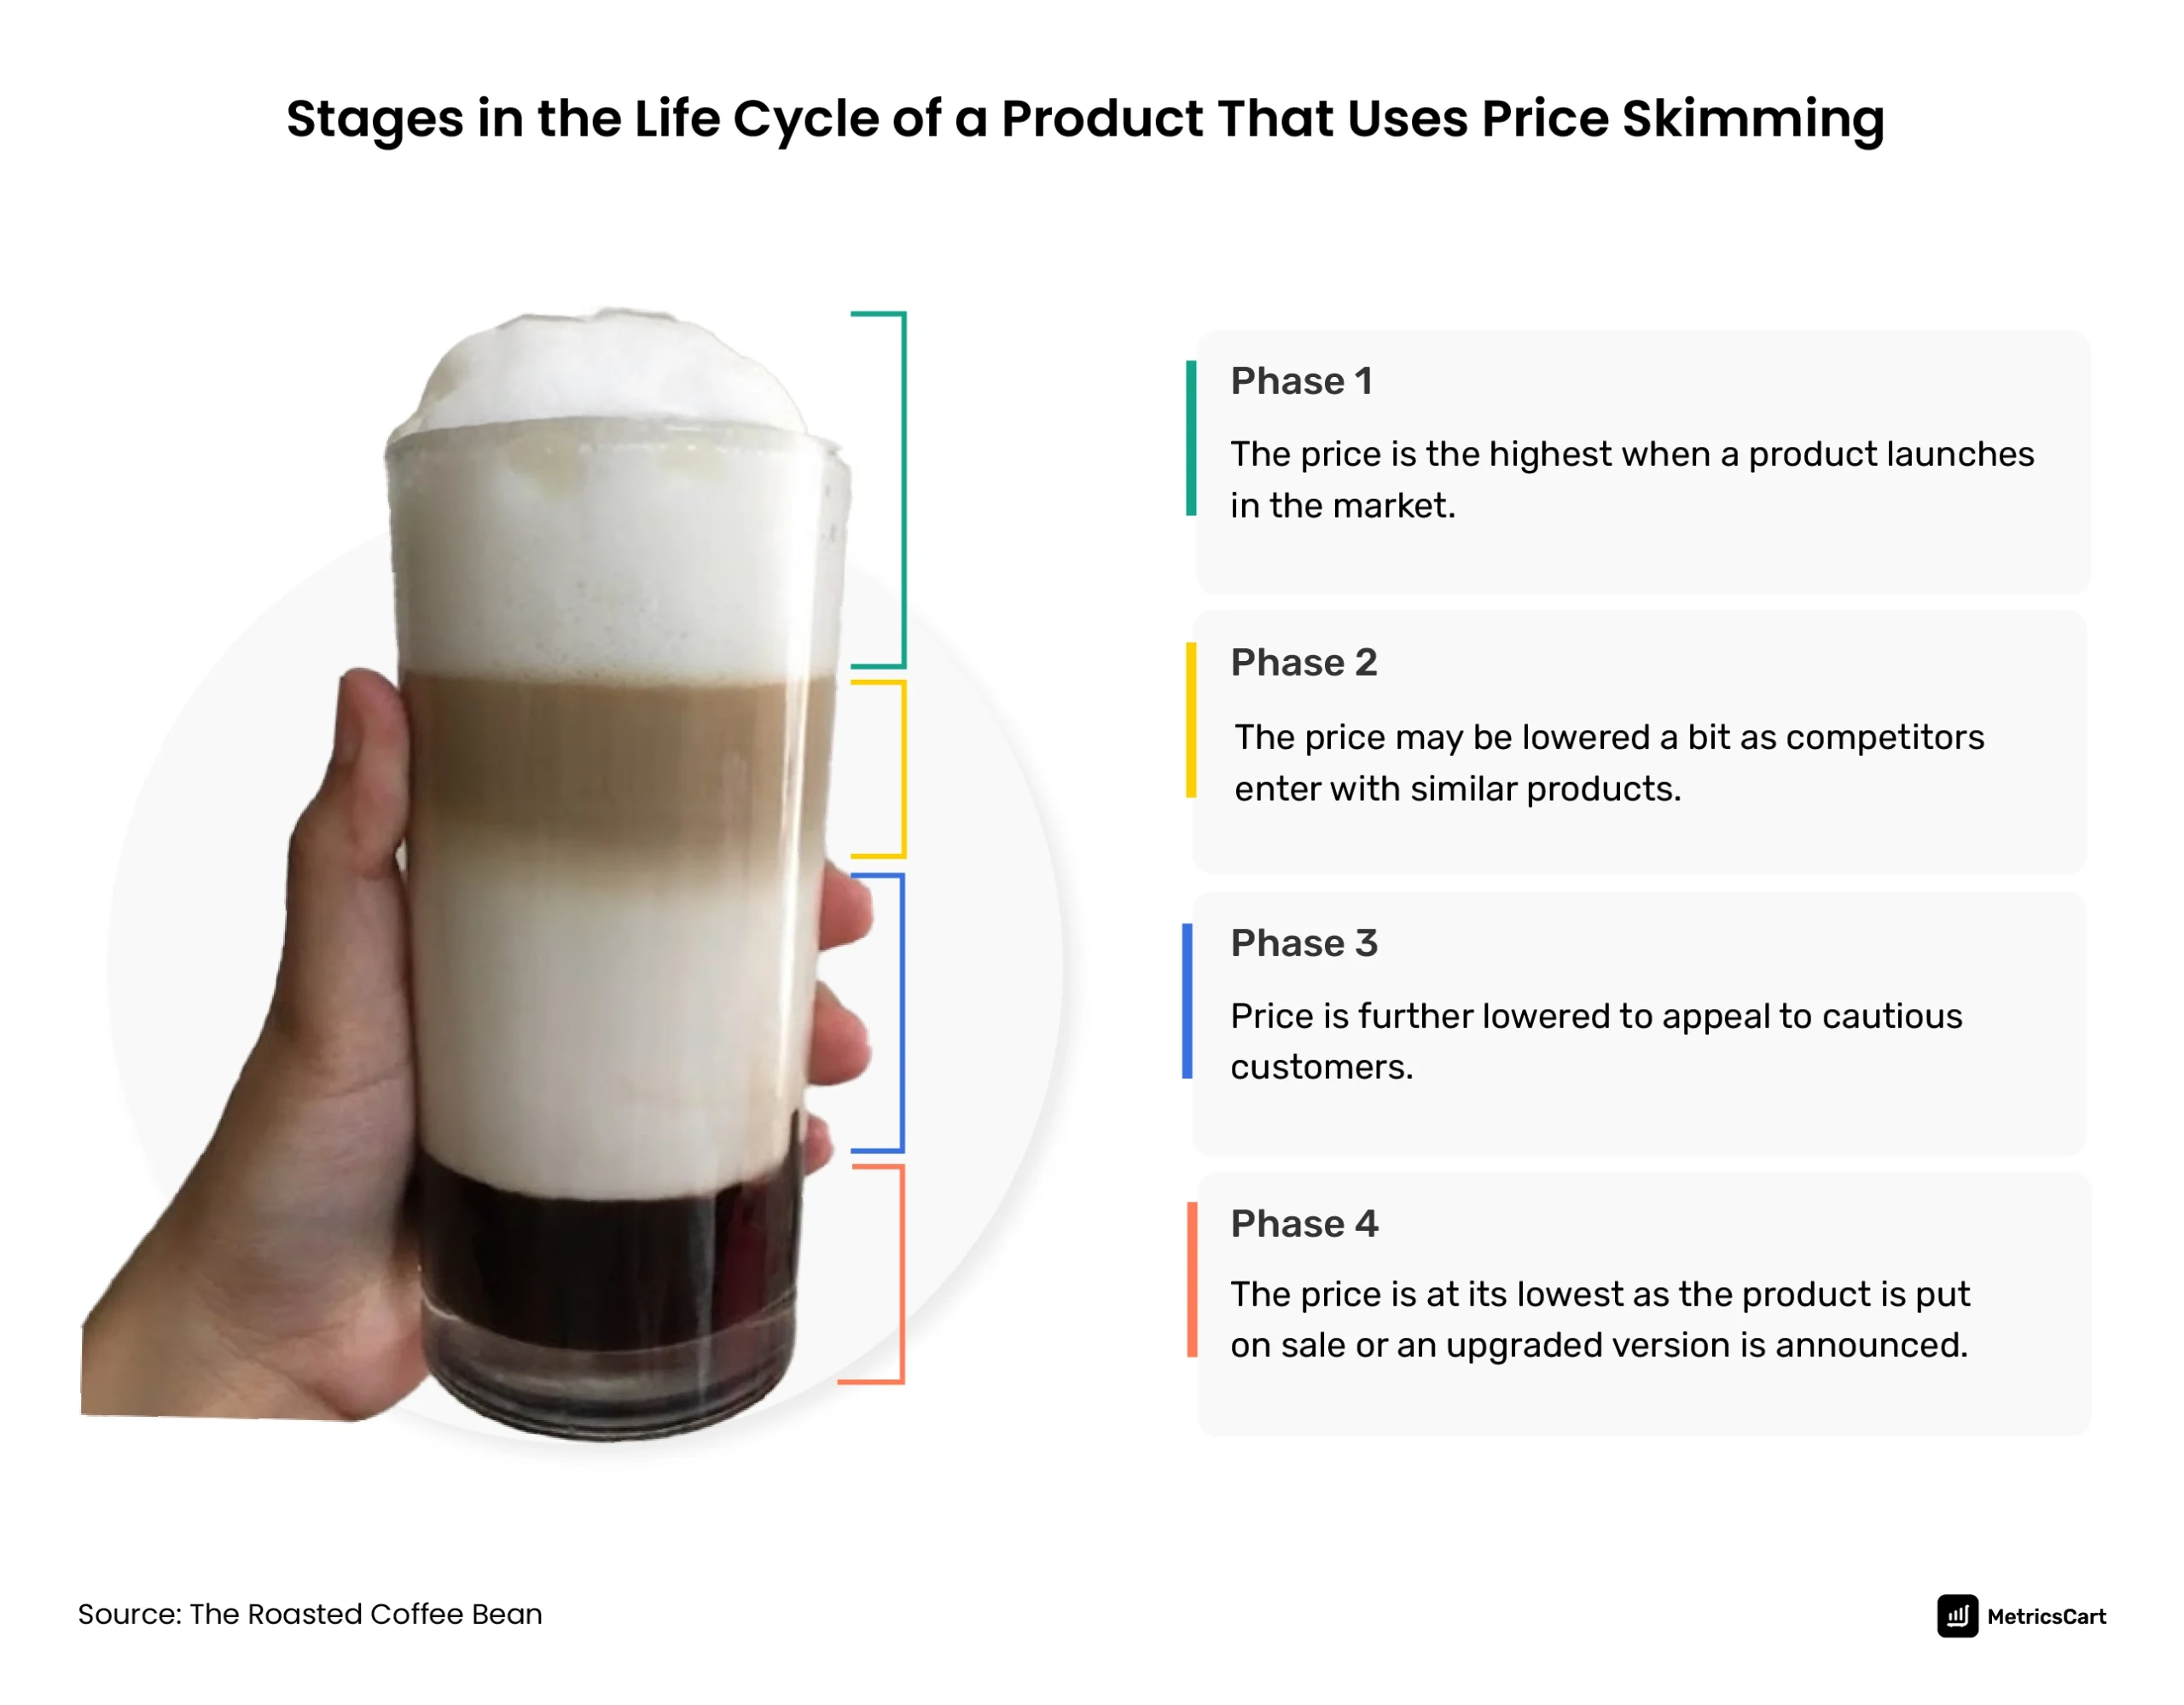 4 Phases in Price Skimming Strategy